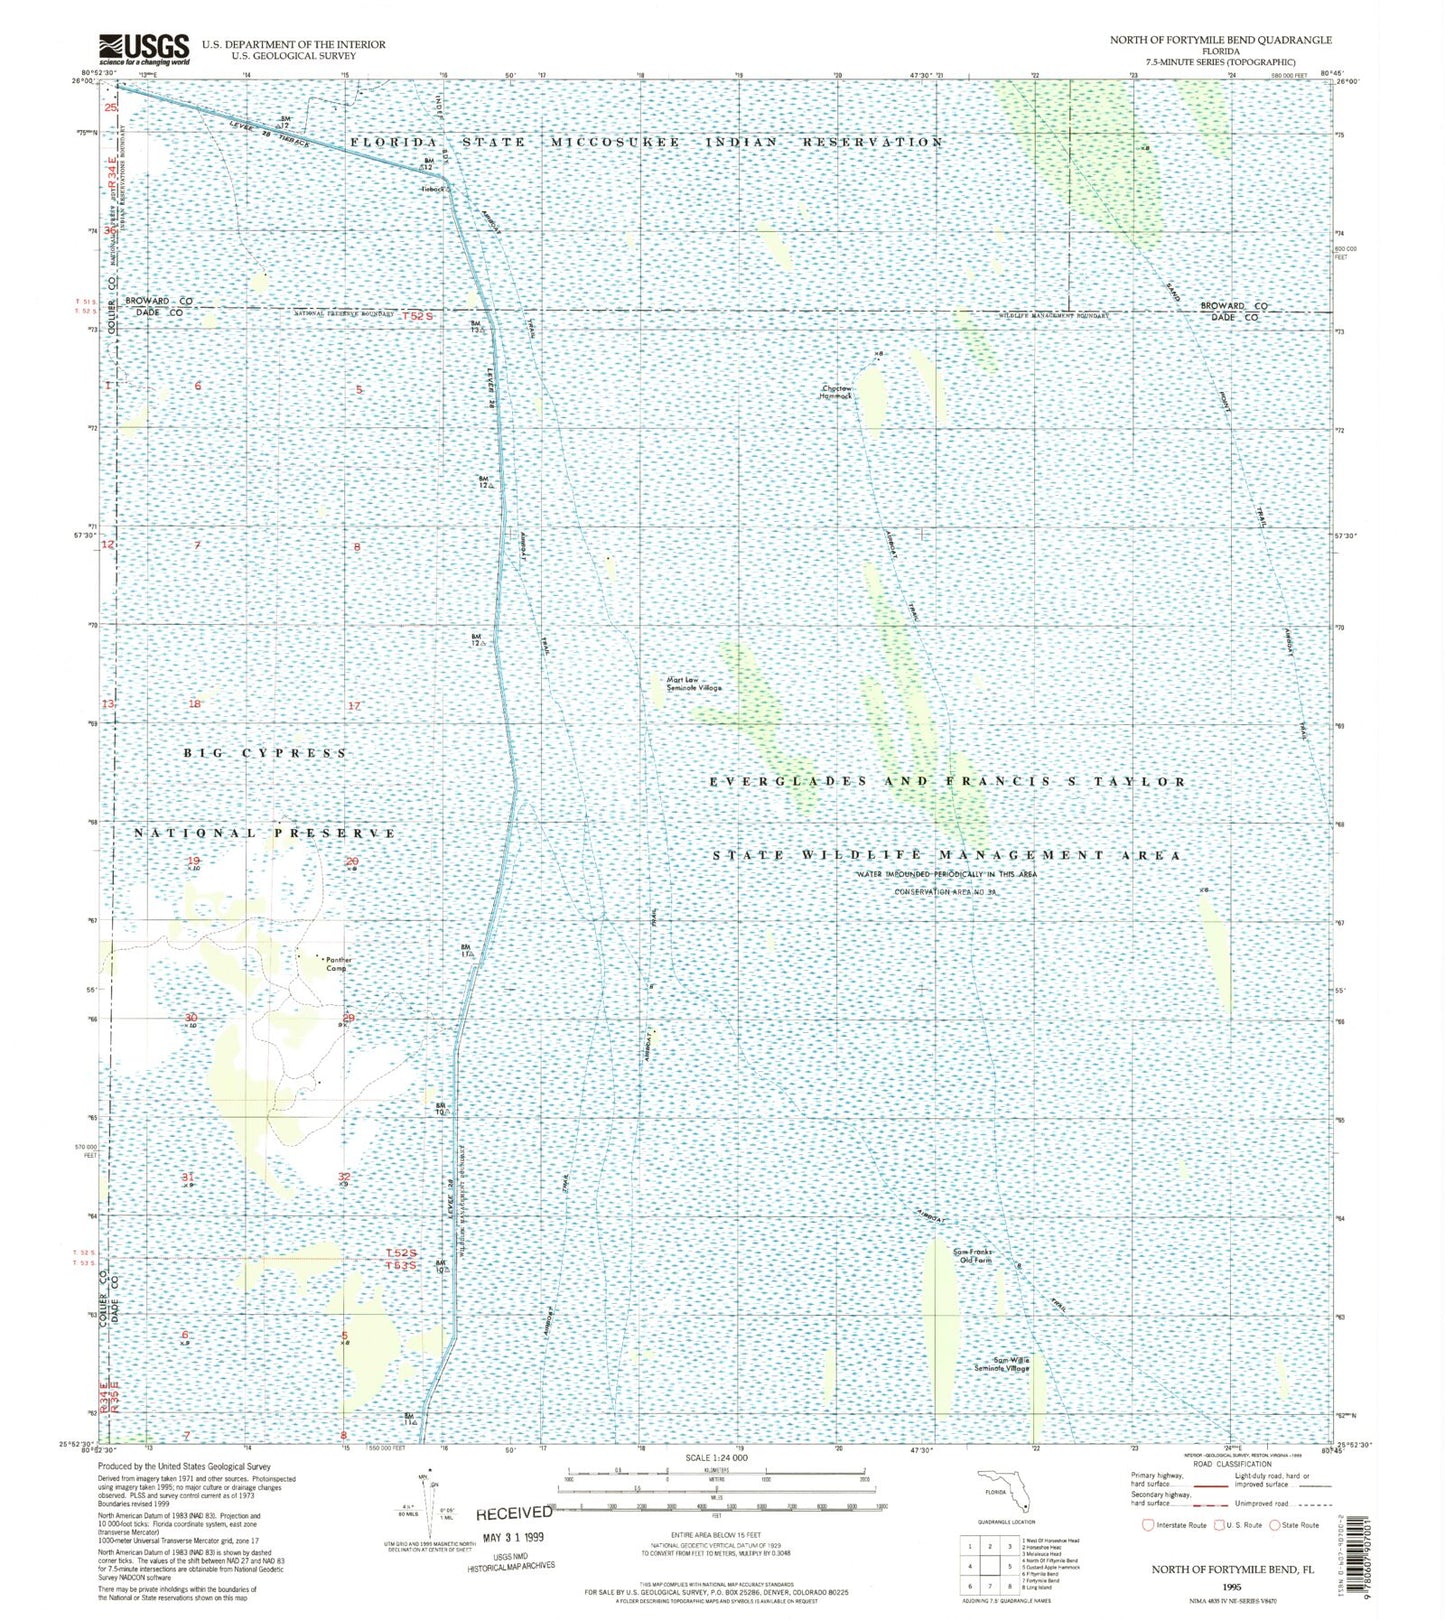 Classic USGS North of Fortymile Bend Florida 7.5'x7.5' Topo Map Image